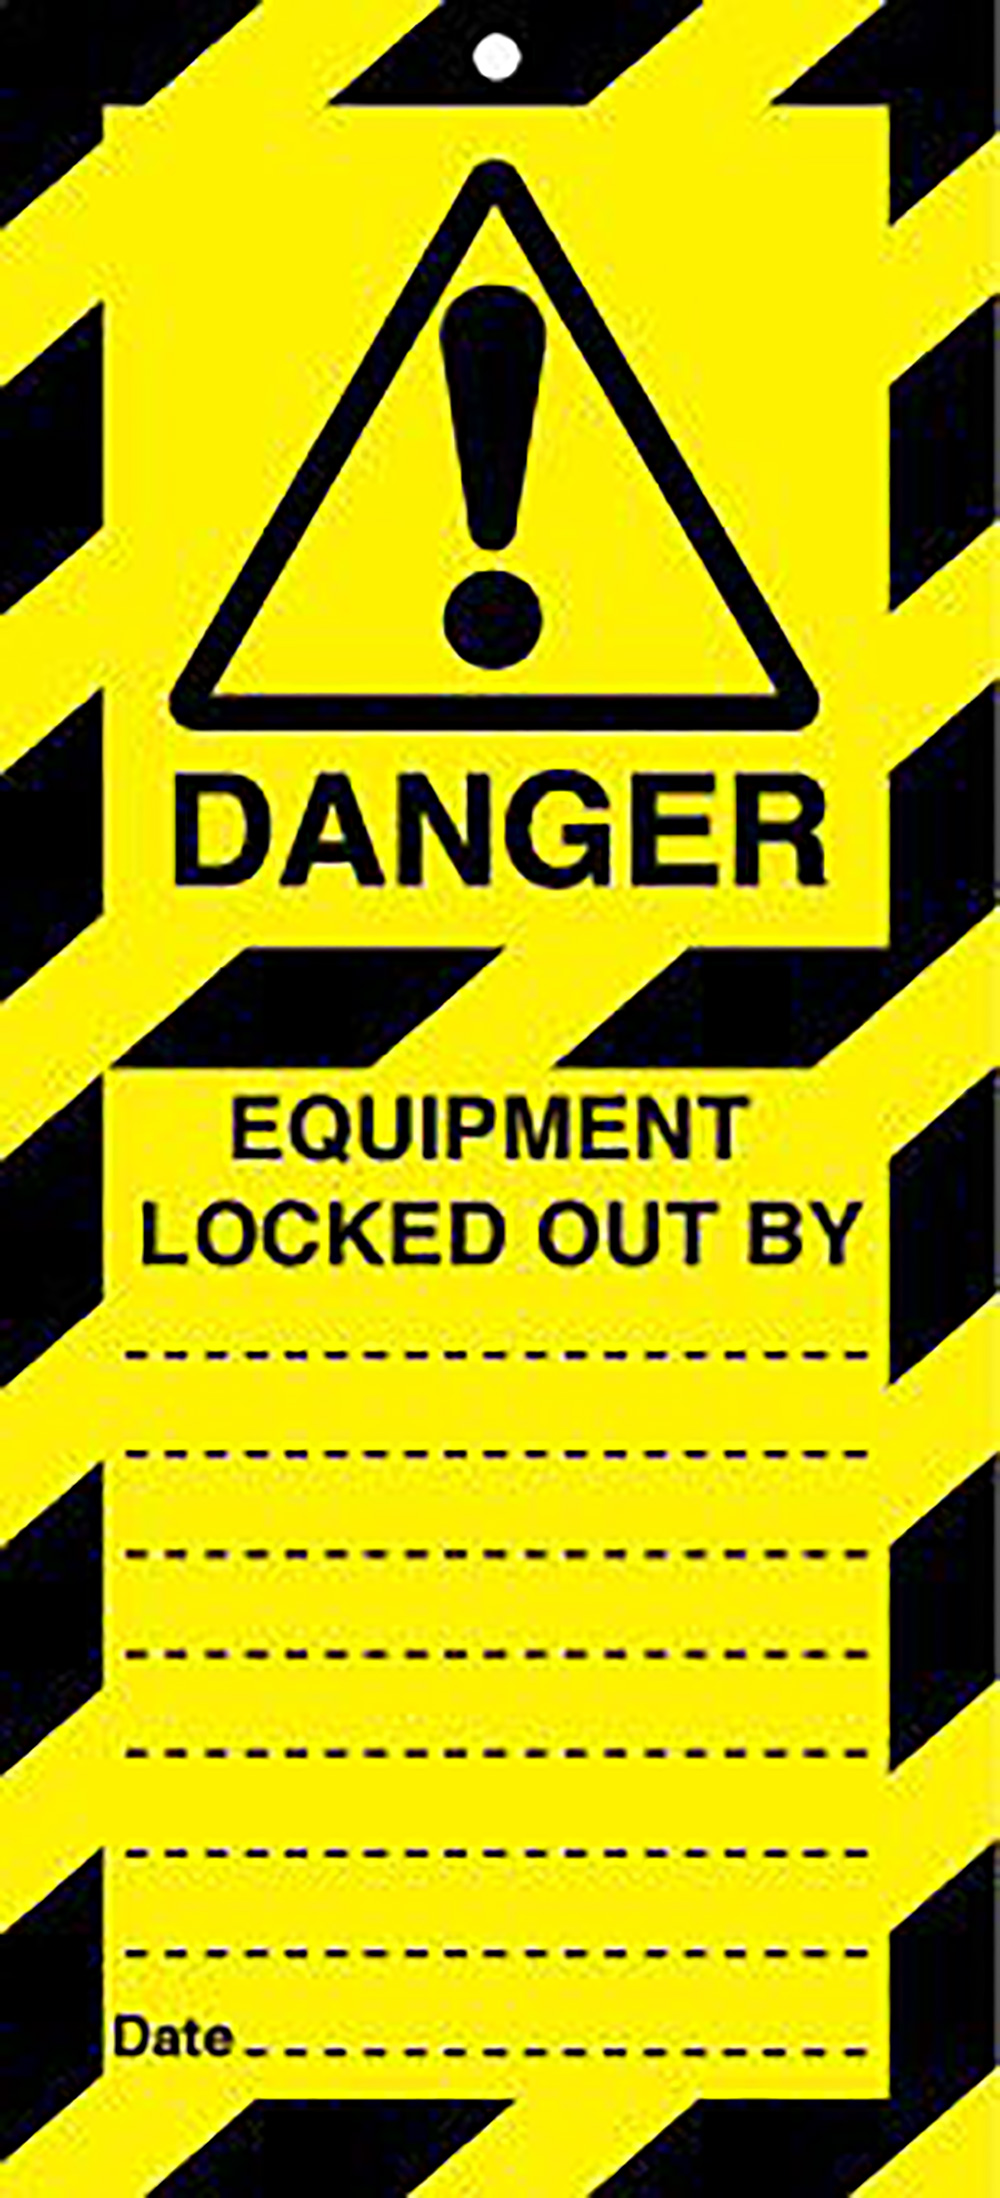 75x160mm Danger Equipment Locked Our By Lockout tags